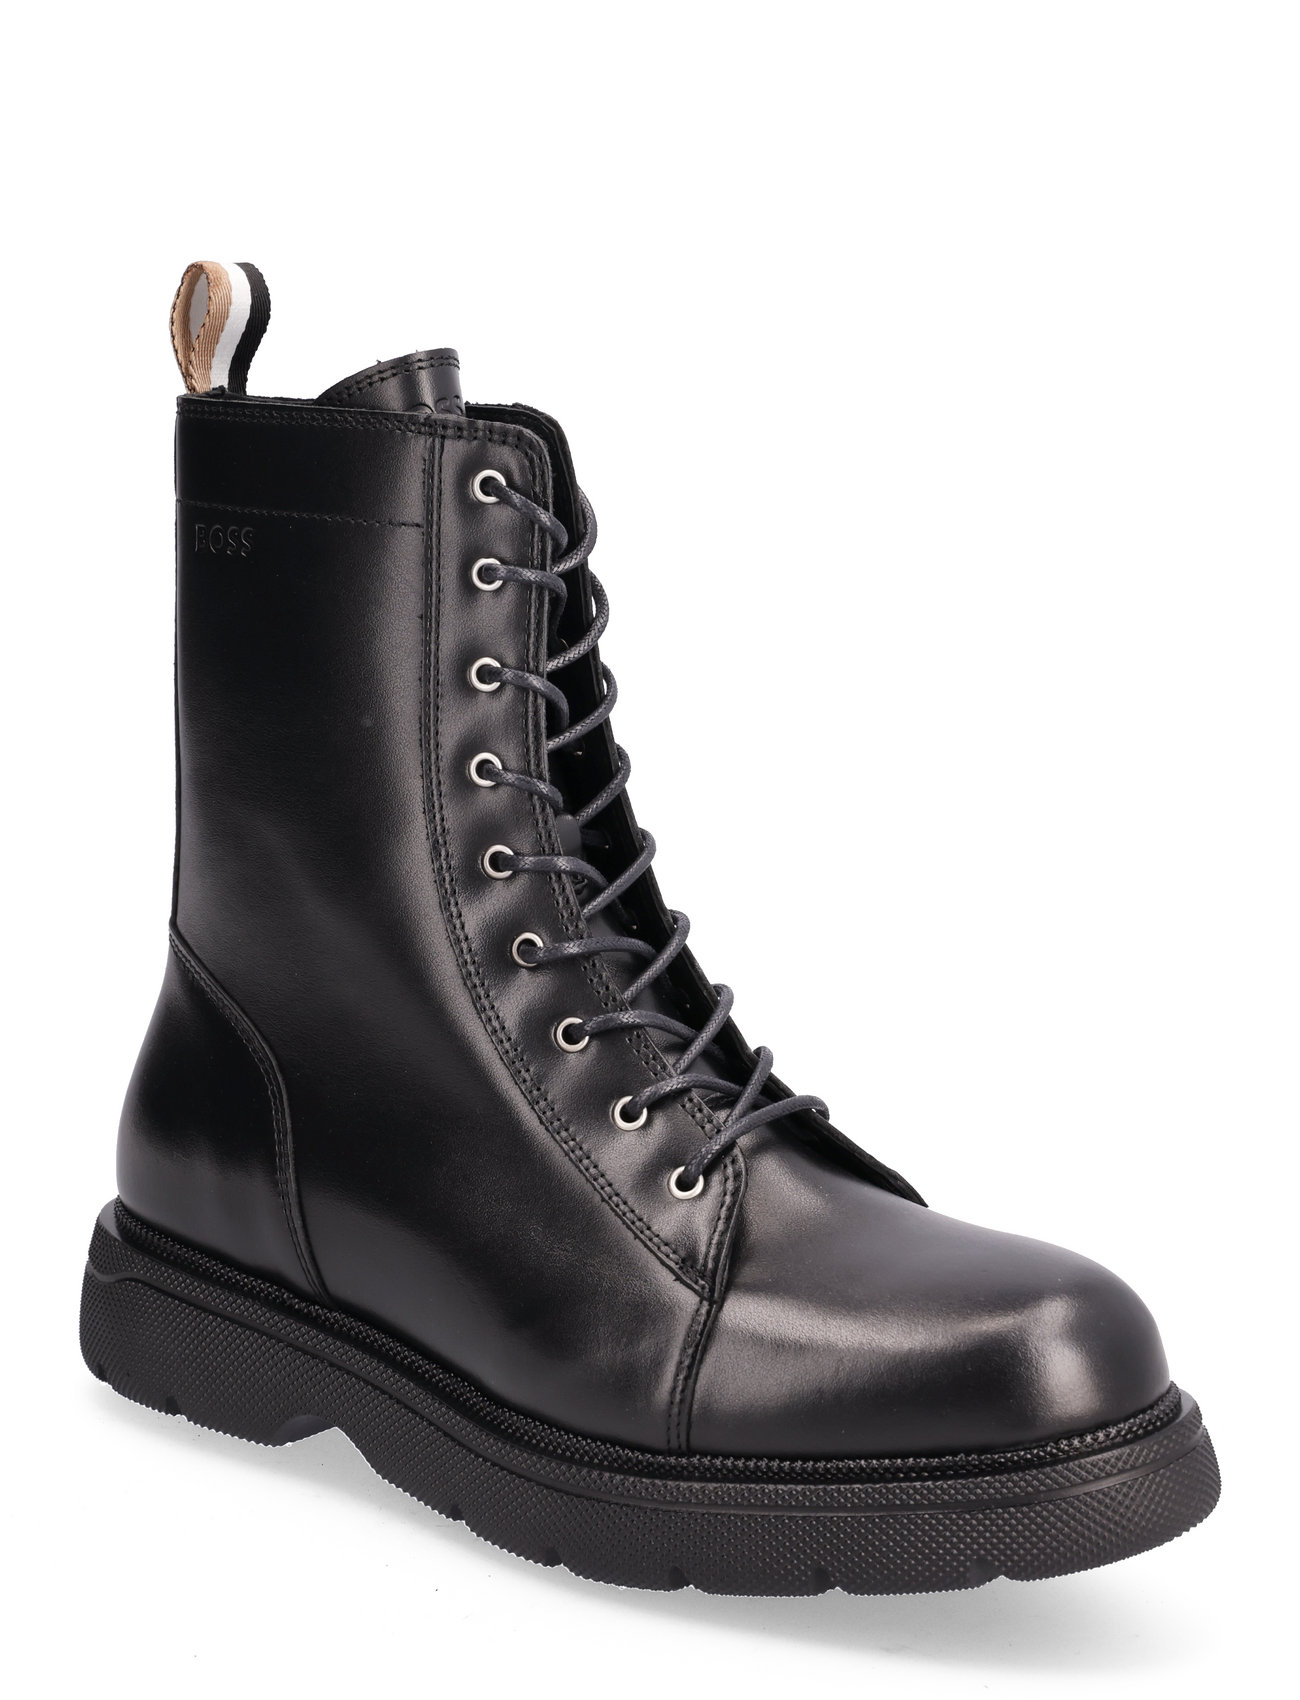 BOSS Jacob Laceup-c (Black), (143.52 €) | Large selection of outlet ...